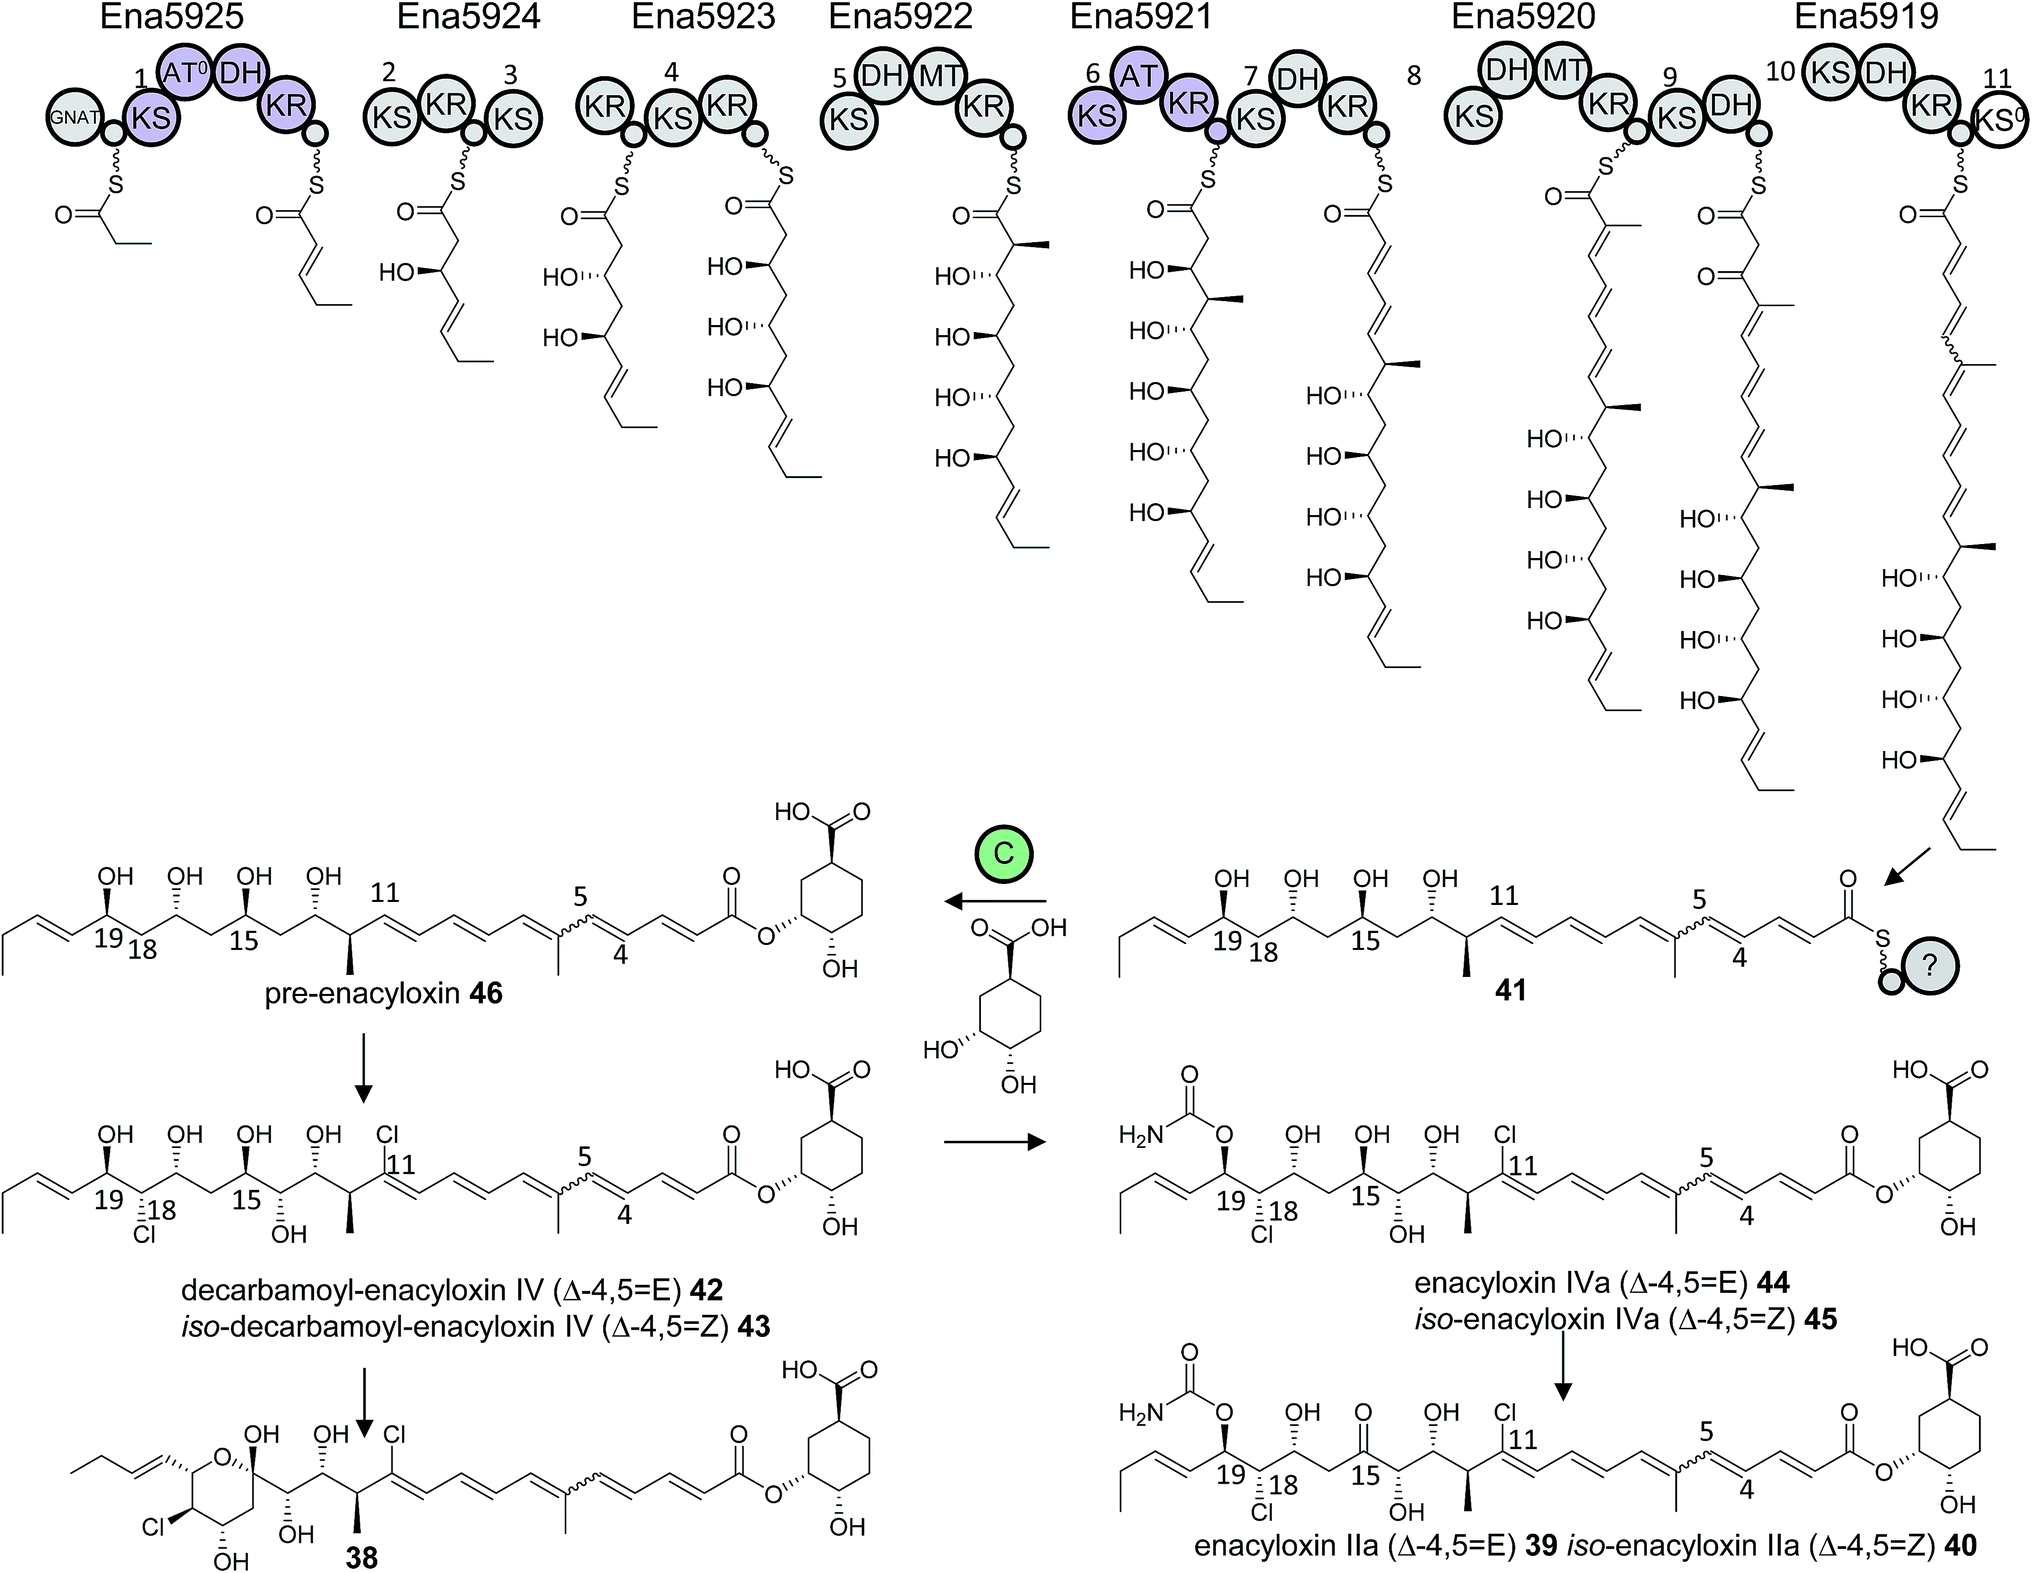 Biosynthesis of polyketides by trans -AT polyketide synthases 